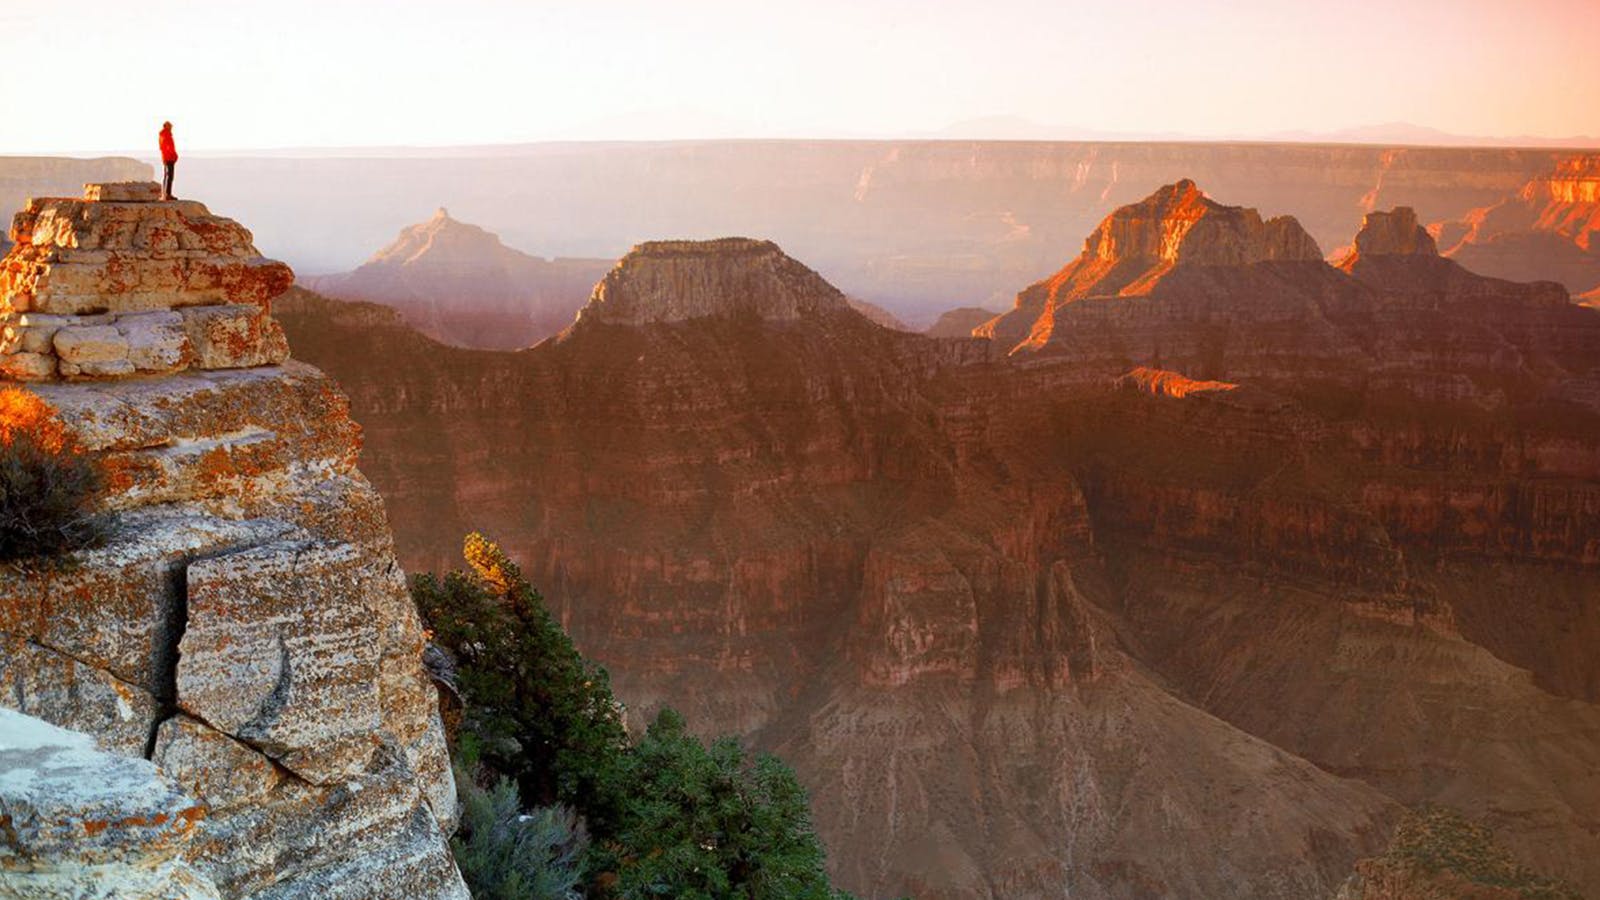 Road Trip to the Underrated Side of the Grand Canyon. Travel